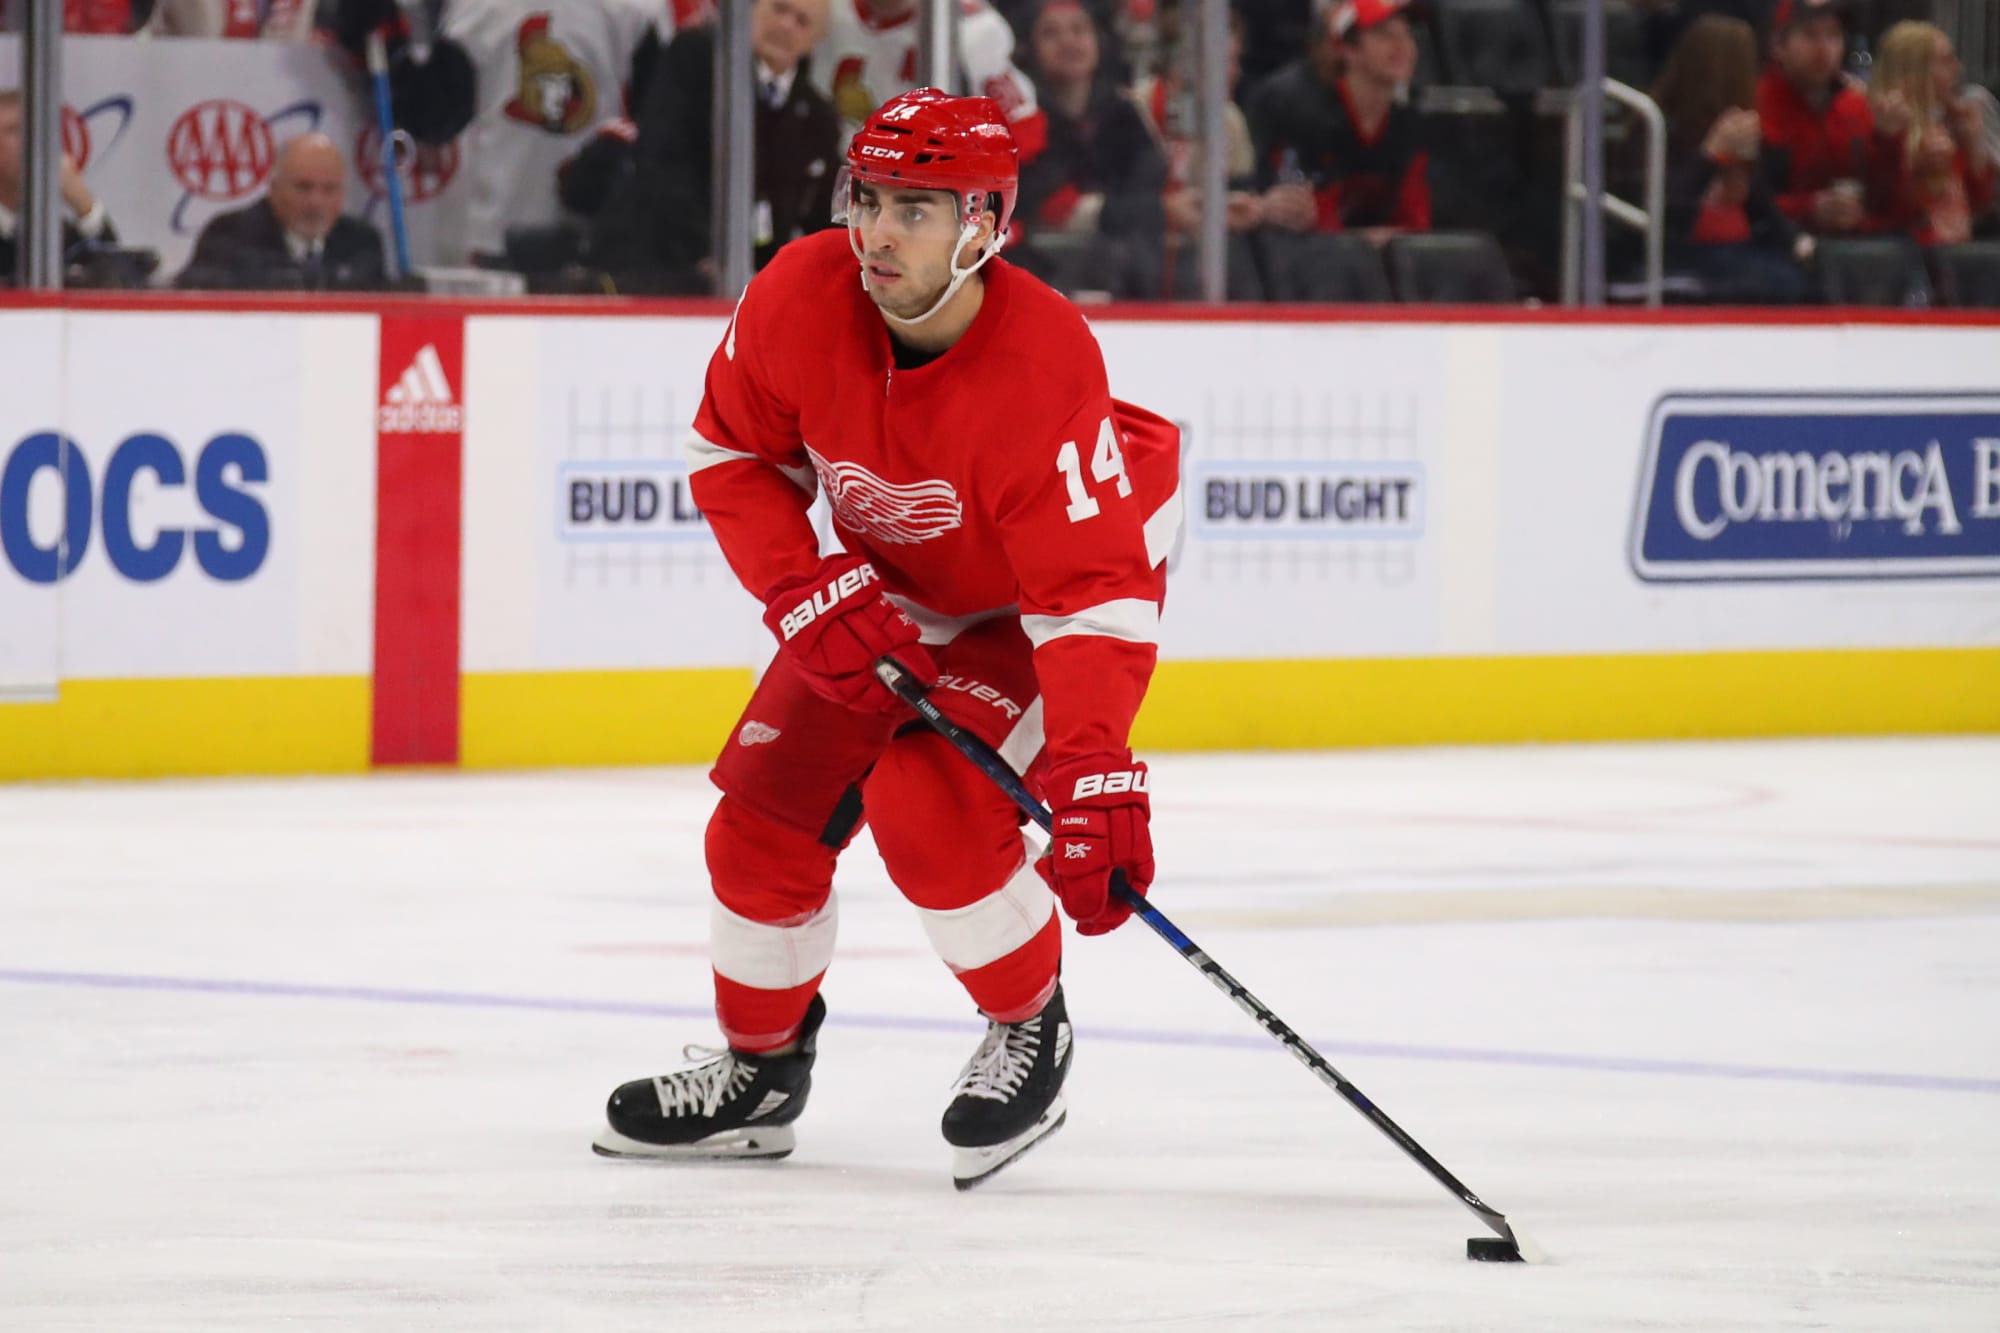 Detroit Red Wings: Robby Fabbri will anchor second line with Filip Zadina